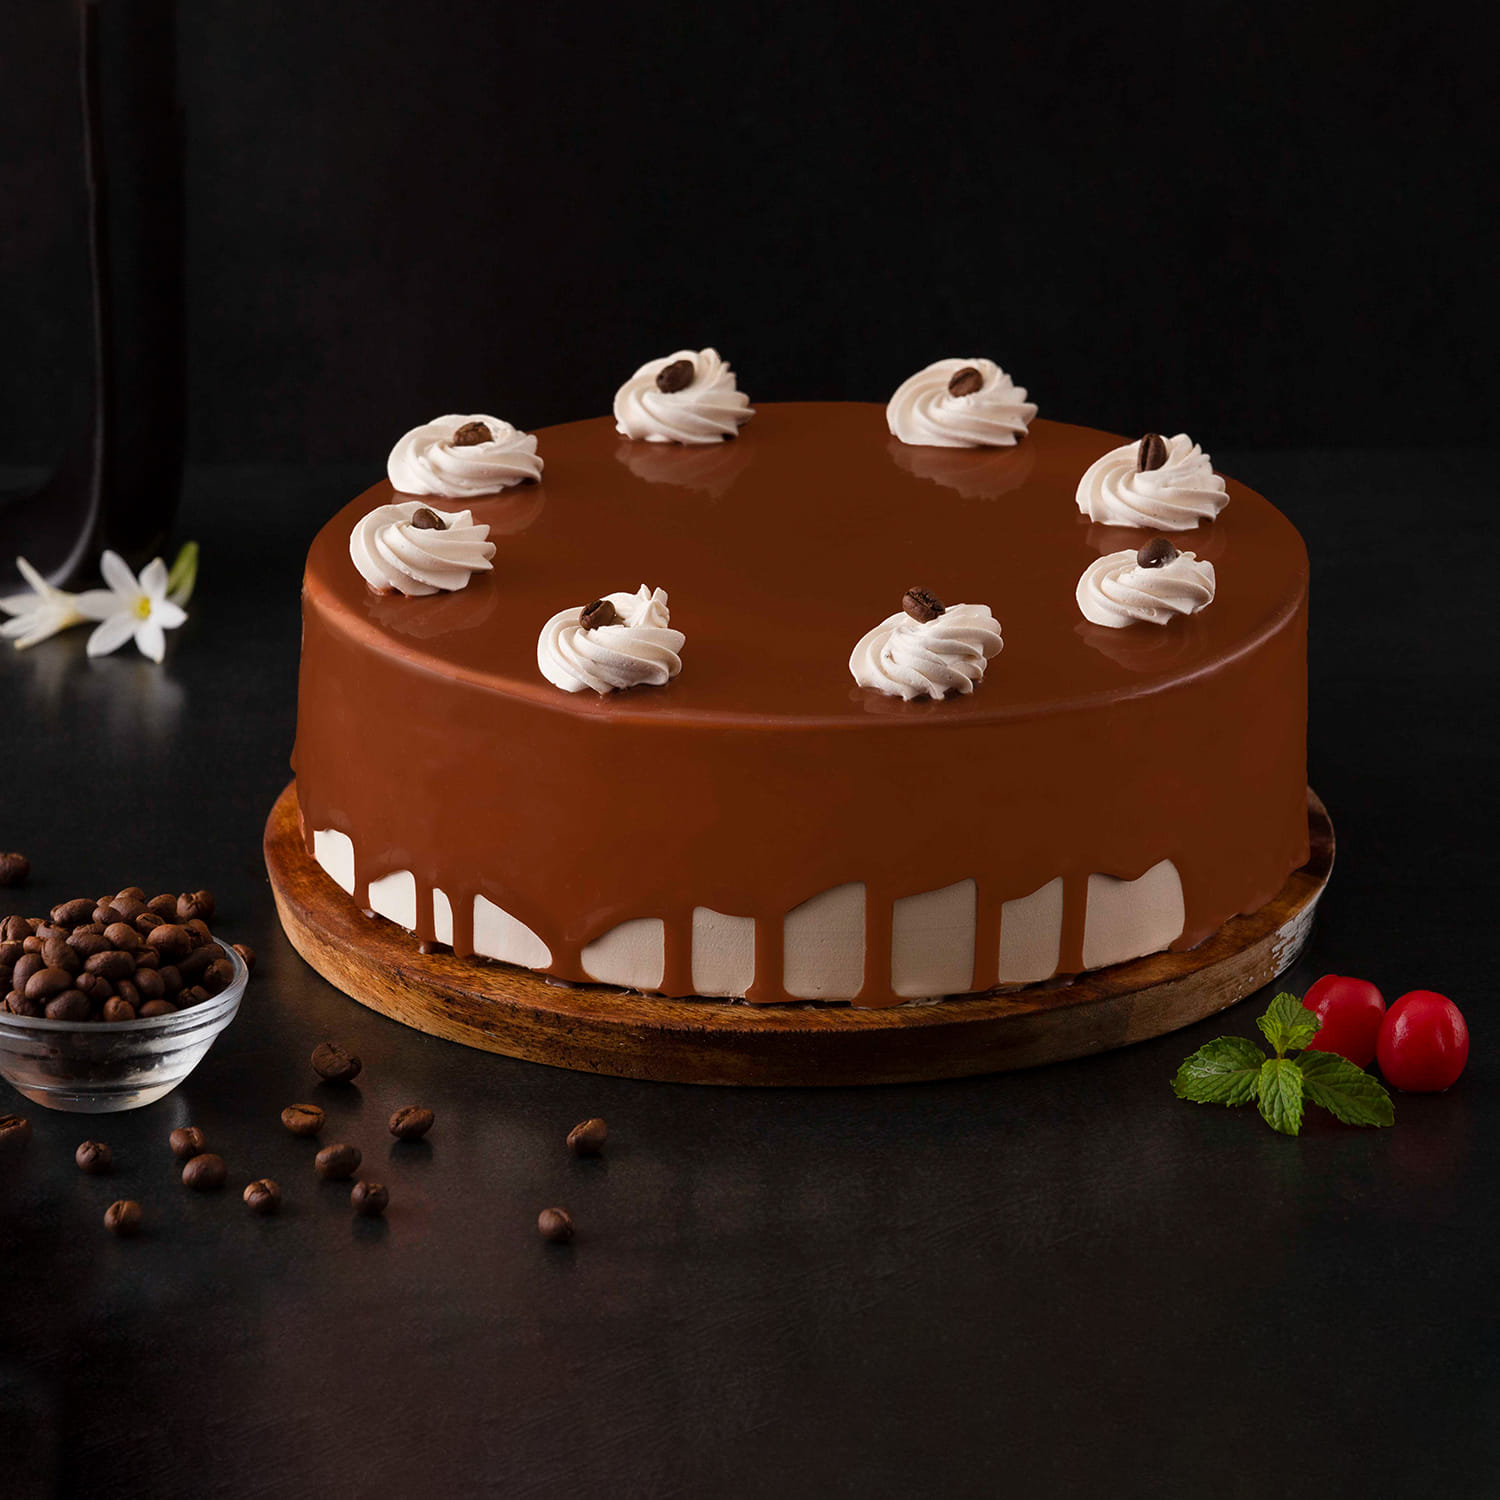 Send Best Mom Black Forest Cream Cake Online in India at Indiagift.in